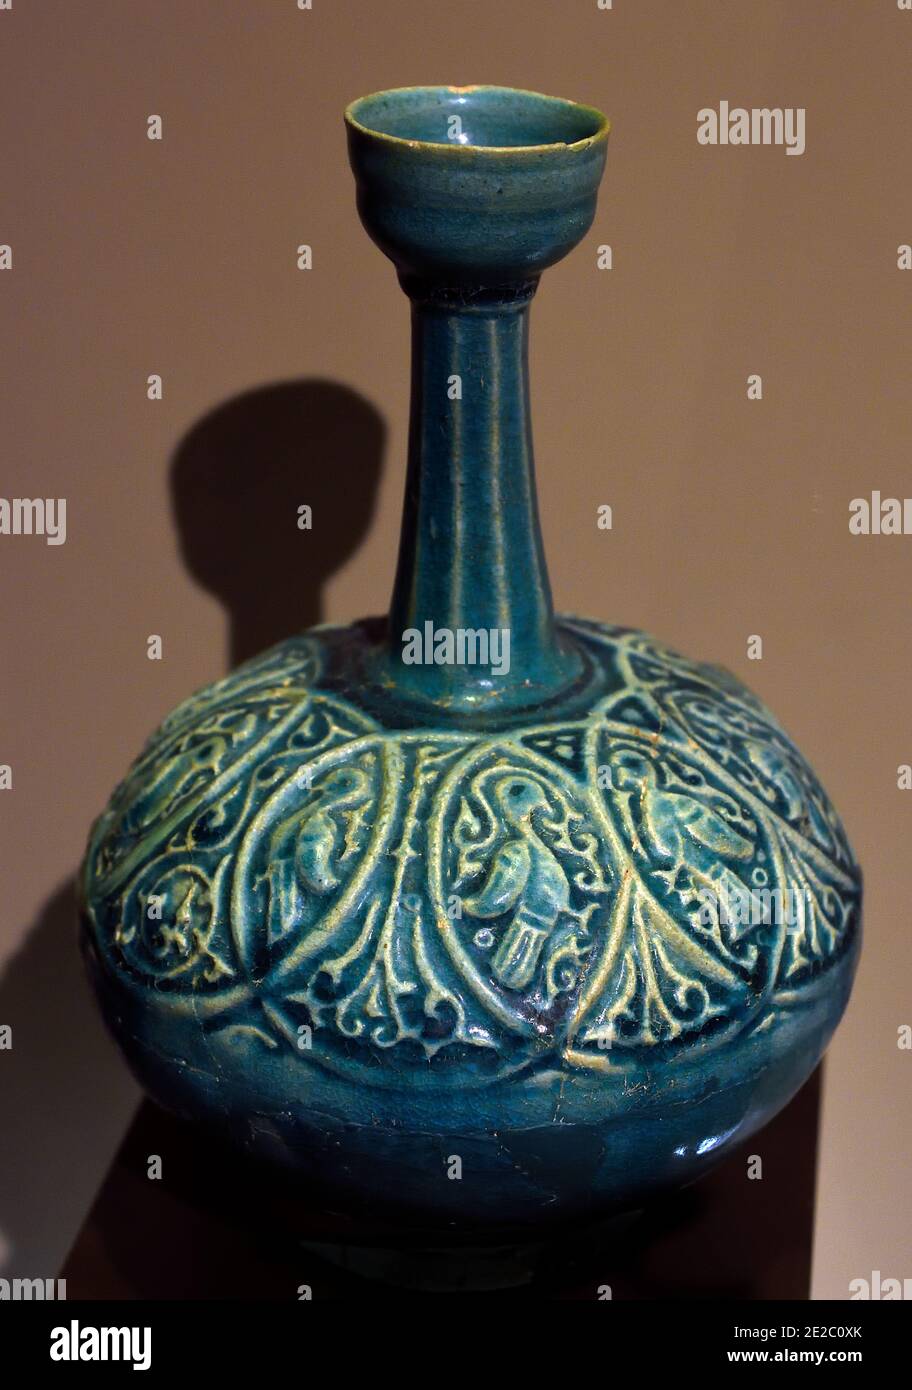 Bottle Seljuq period 12th - 13th Century (1040-1157) IRAN, KASHAN Frit body, overglaze lustre decoration, opaque white glaze (Kashan is a city in Iran, In the Middle Ages, it was also known for ceramics, 12th - 14th century, high quality pottery and tiles.) Stock Photo